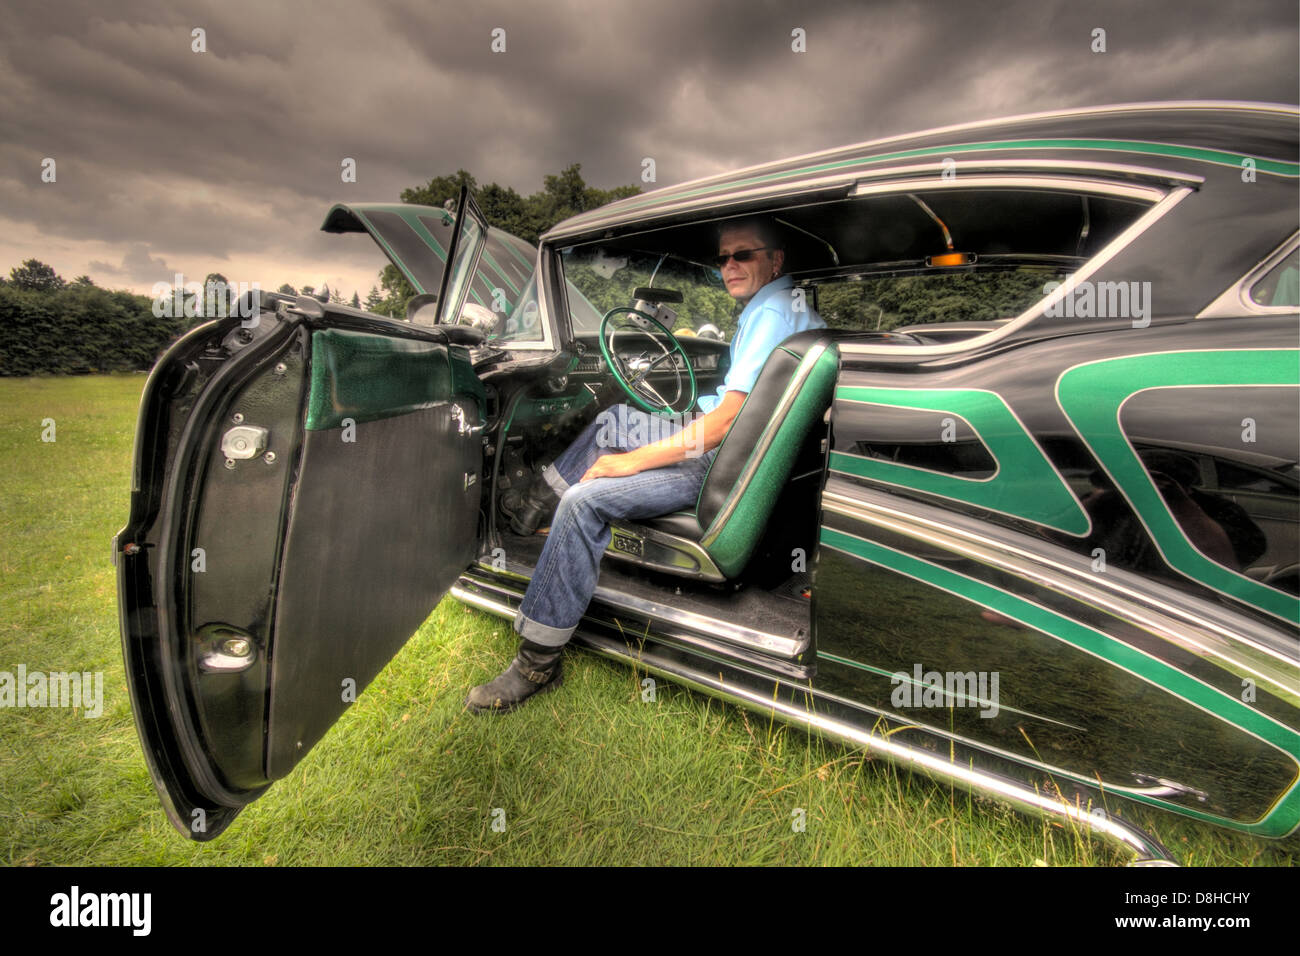 Black & Green 1957 Buick classic car ; Dave Weatherby with his award winning American 1957 classic car Stock Photo